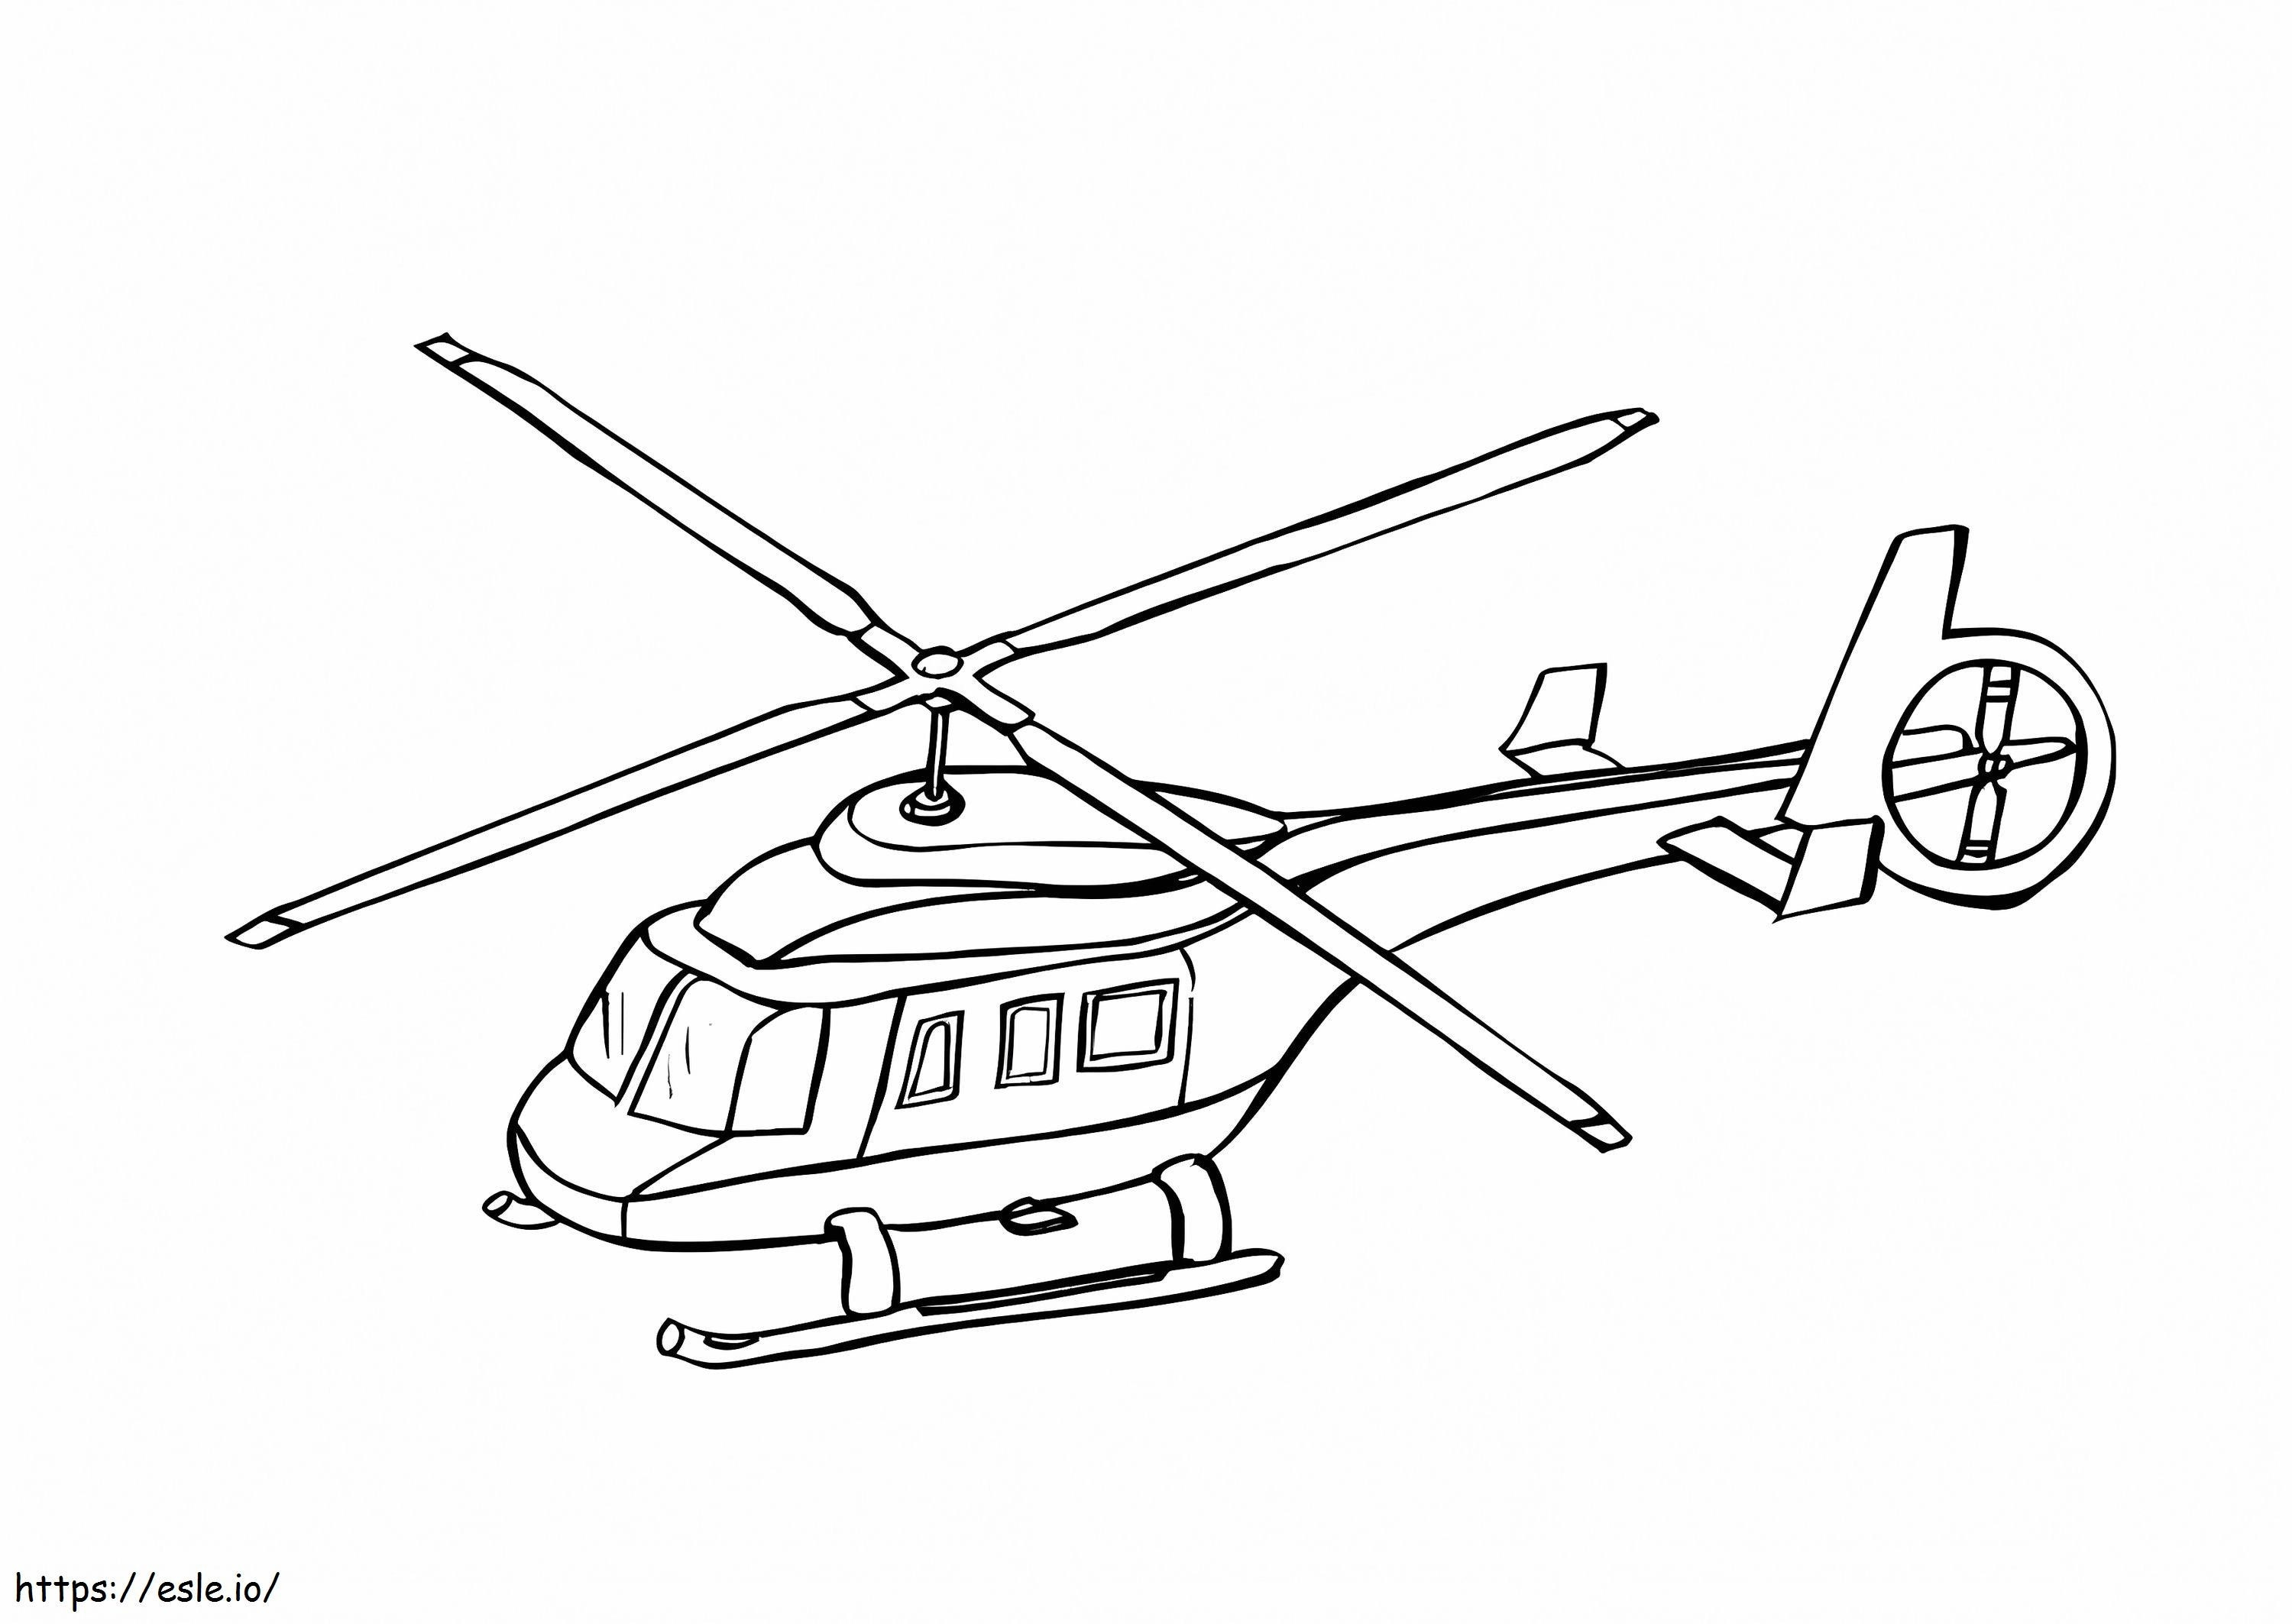 Helicopter 5 coloring page